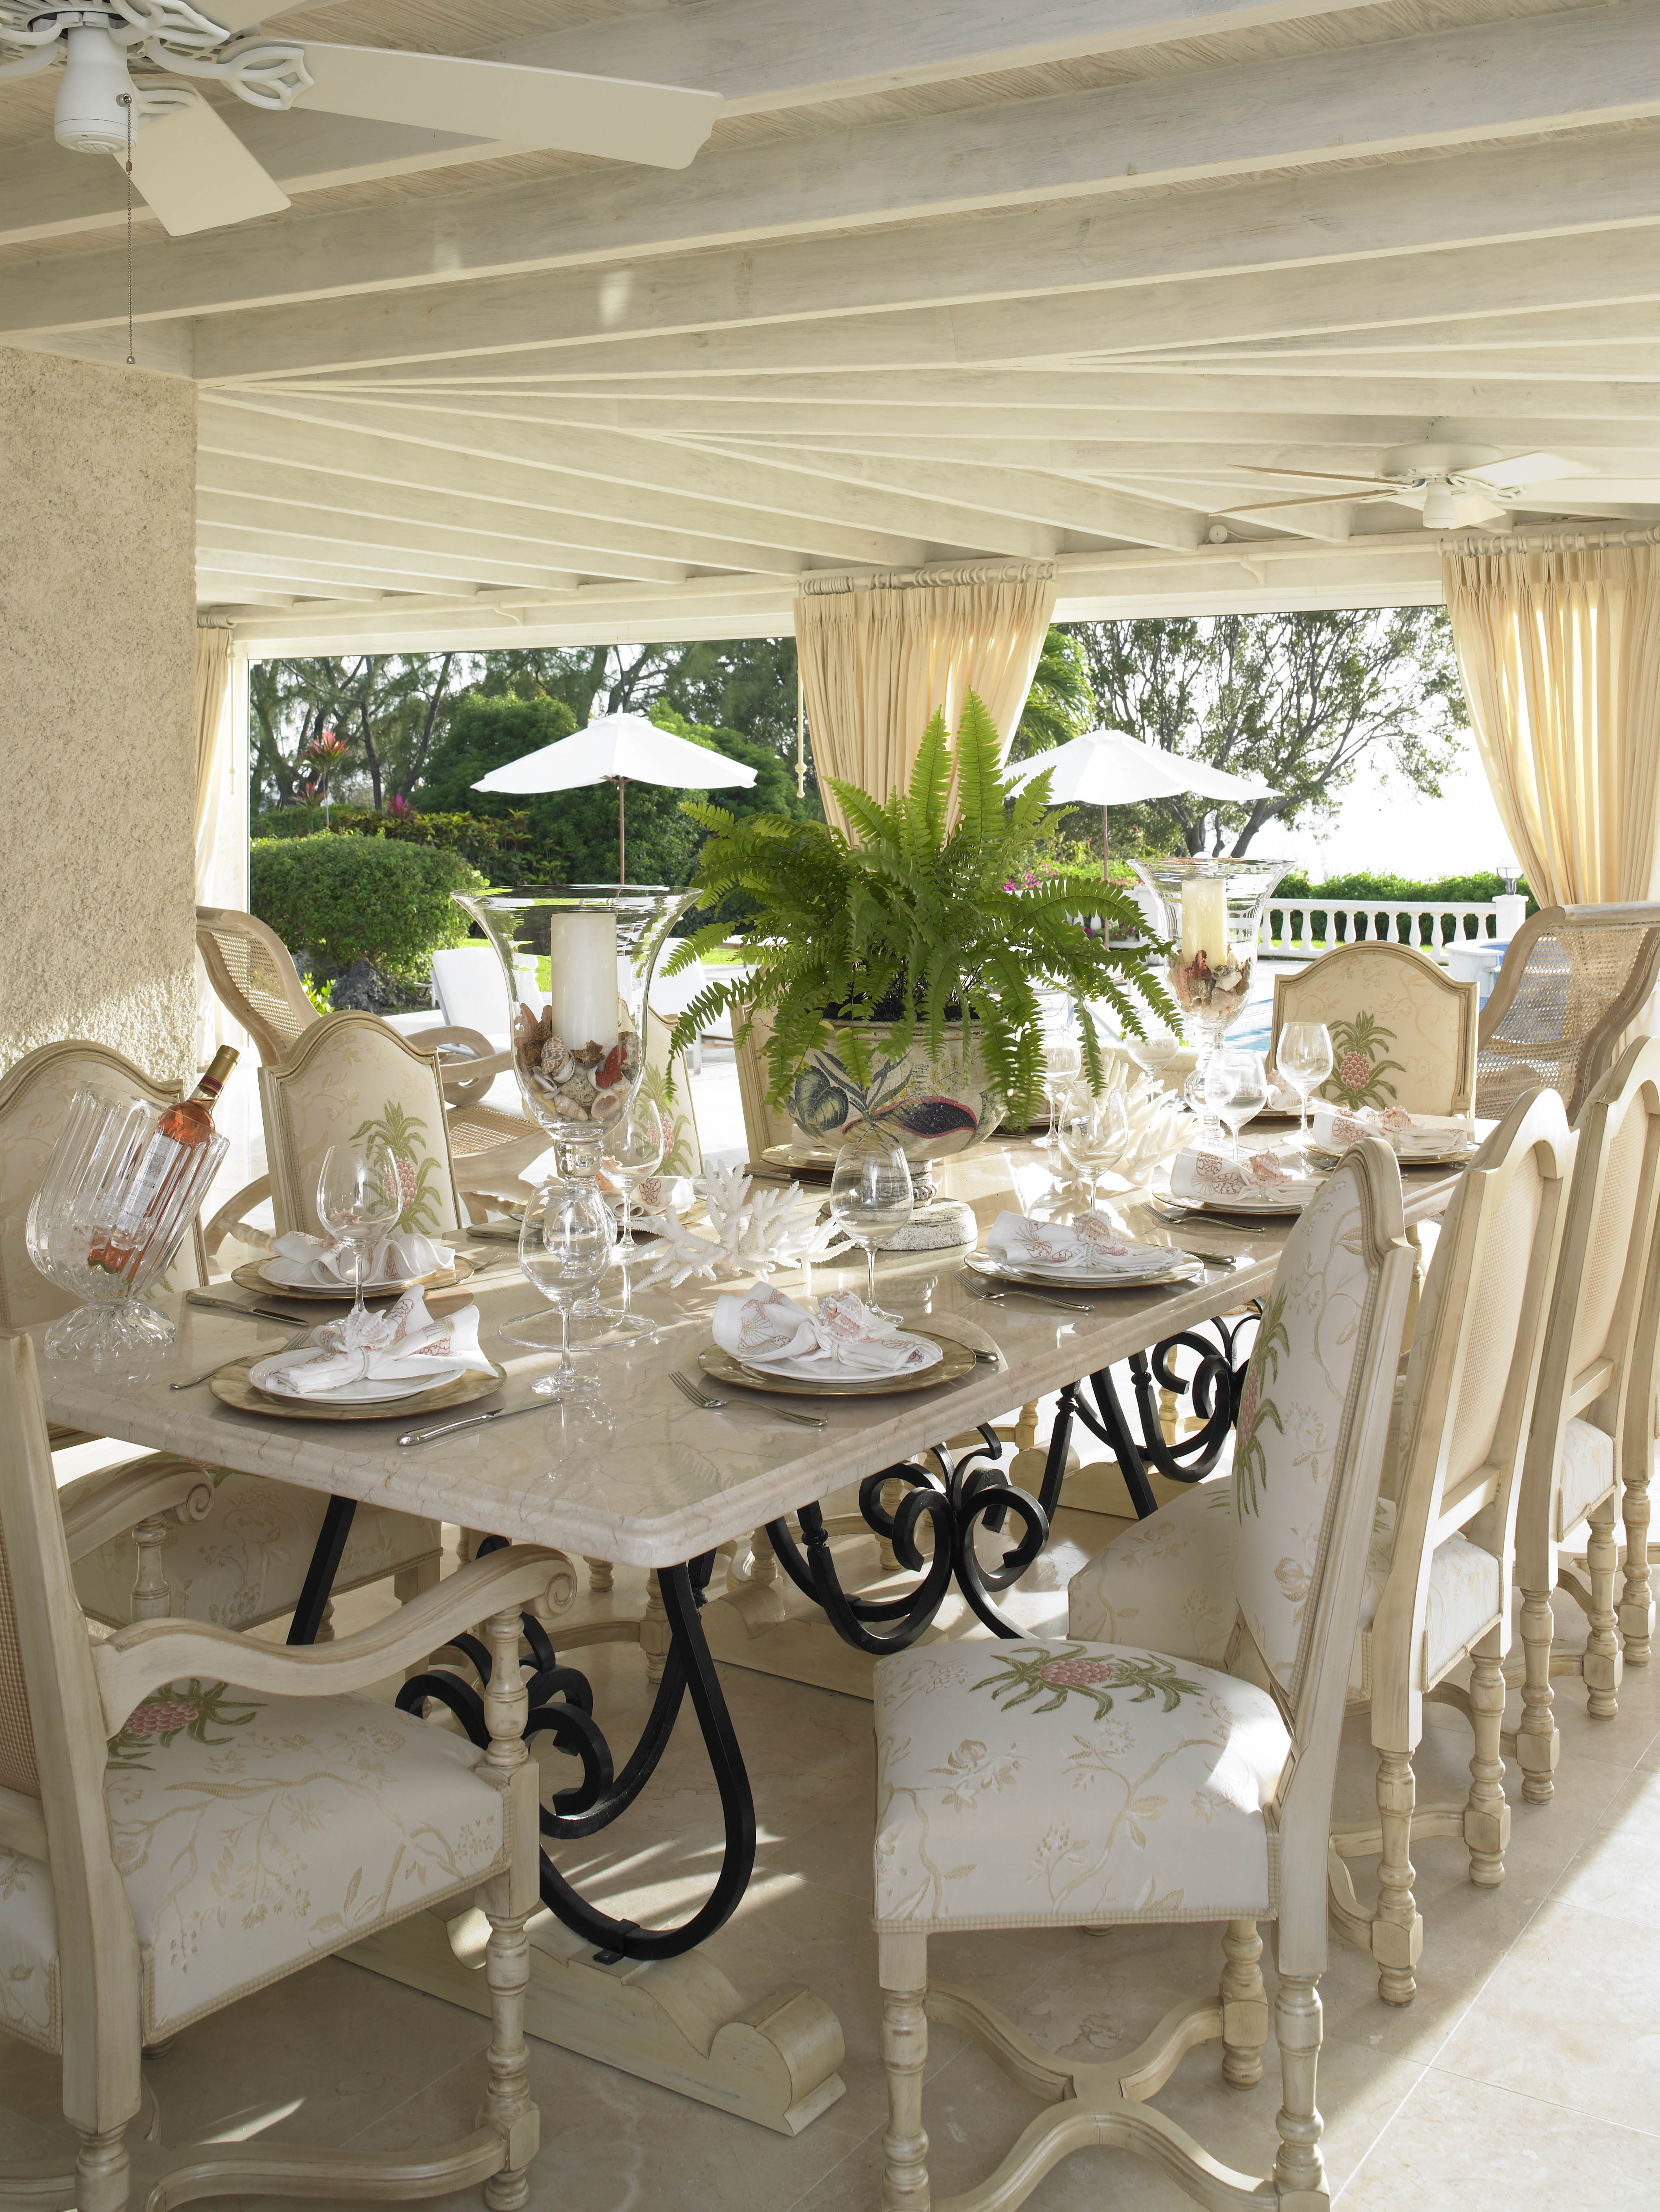 Caribbean life is all about meeting and dining with friends.  The dining area to one end of the verandah sets the tone for this elegant home.  The dining table was designed by Jenny Blanc and made in Barbados.